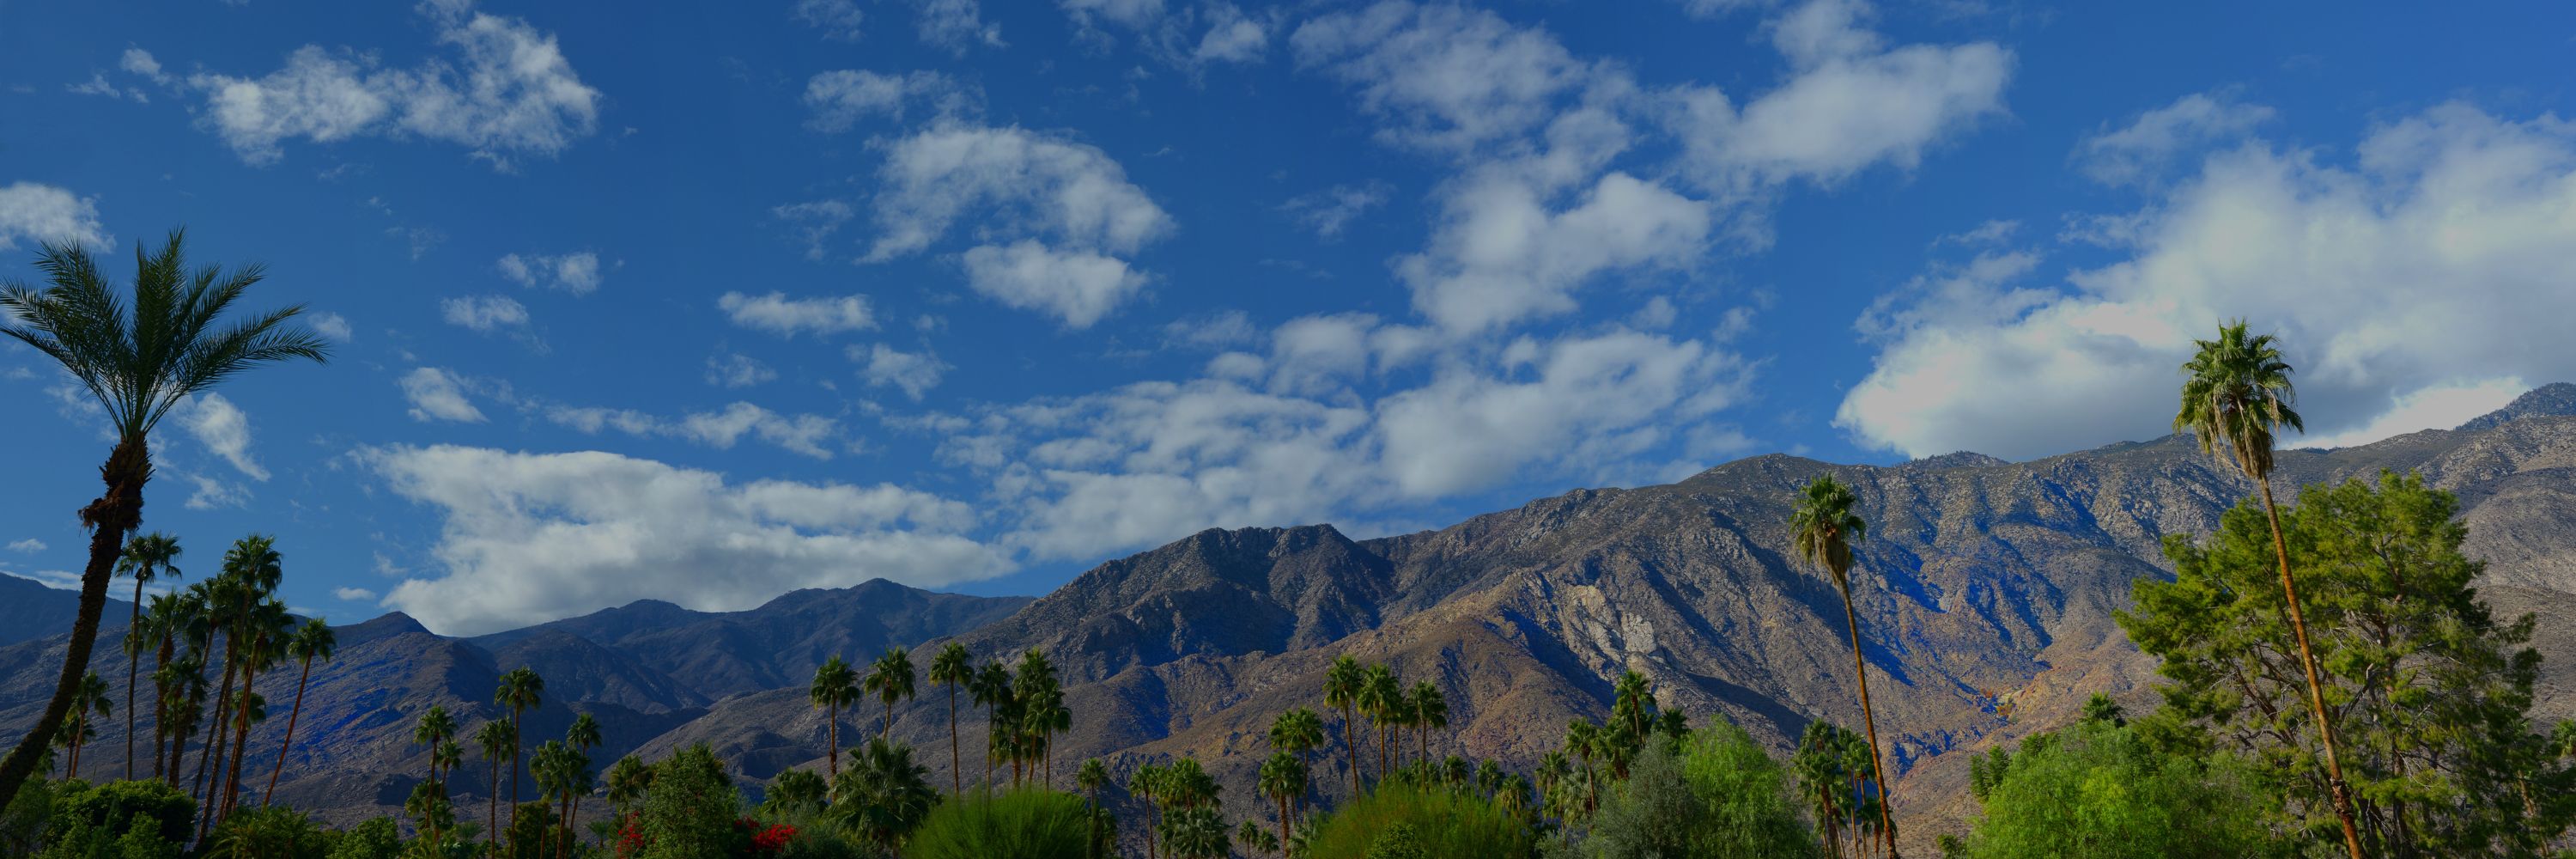 A landscape photo of a mountain vista with palm trees in the foreground and a blue sky with white clouds.